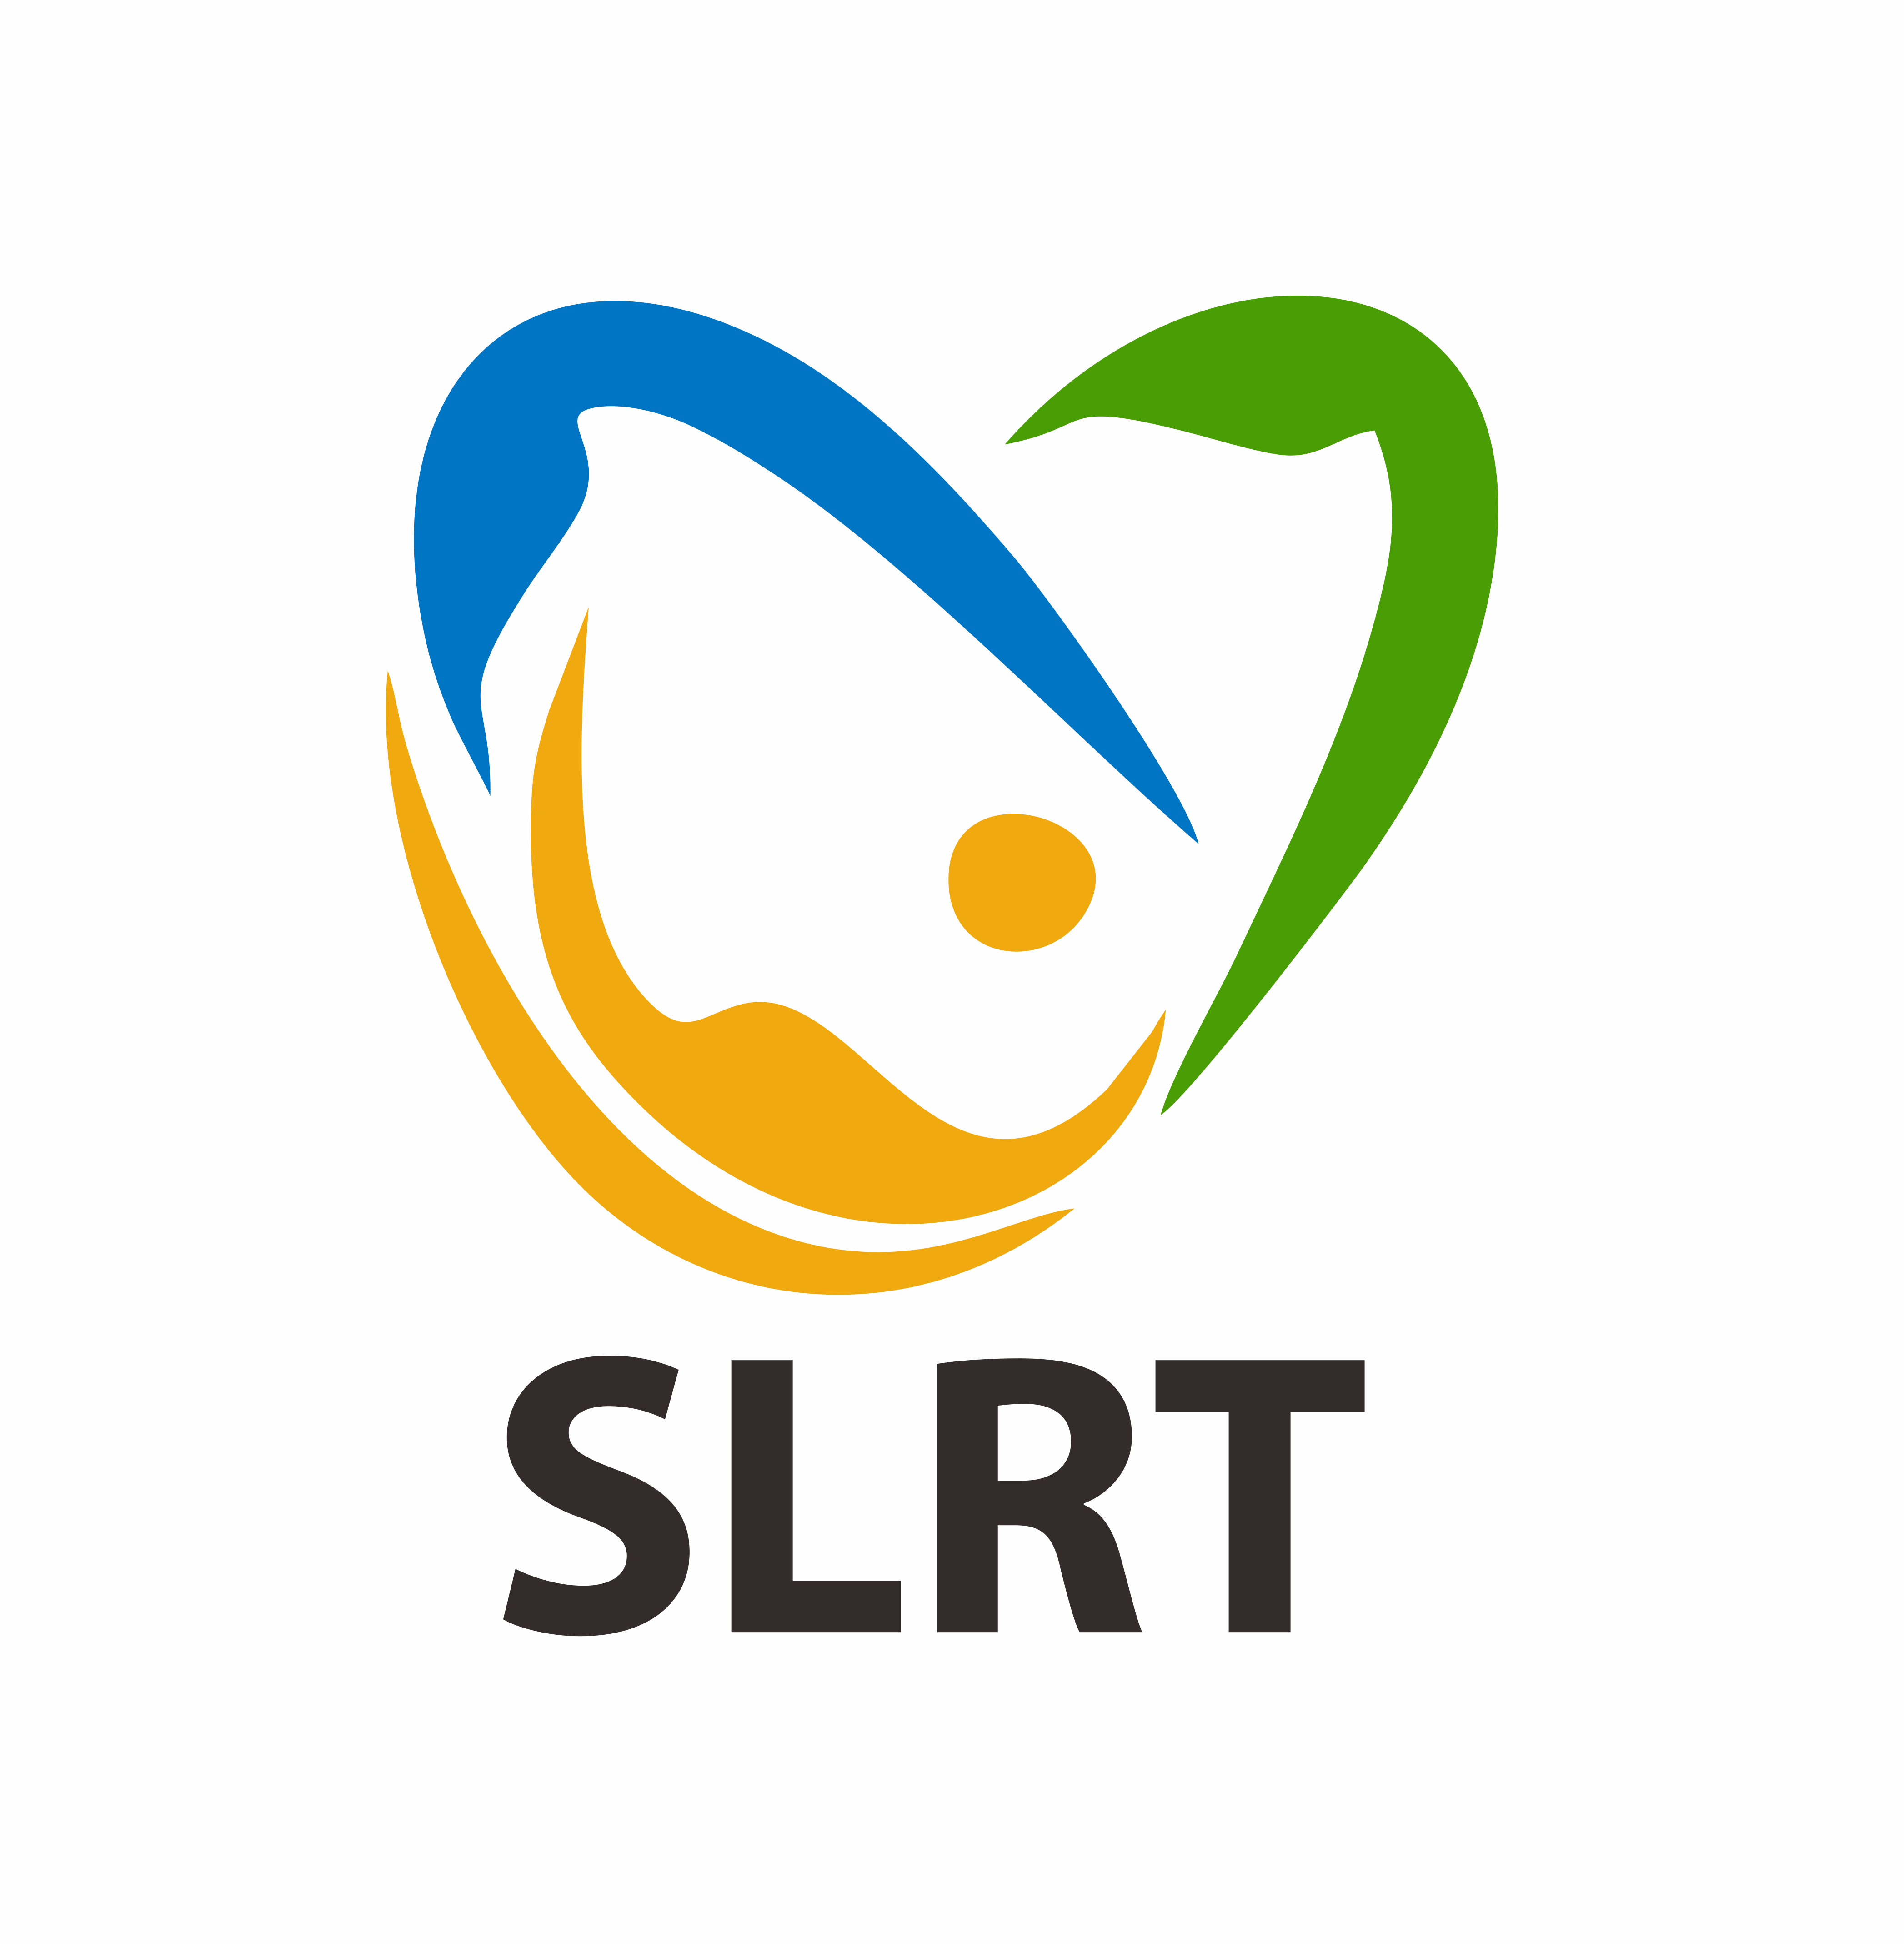 Integrated service and referral system logo (SLRT)